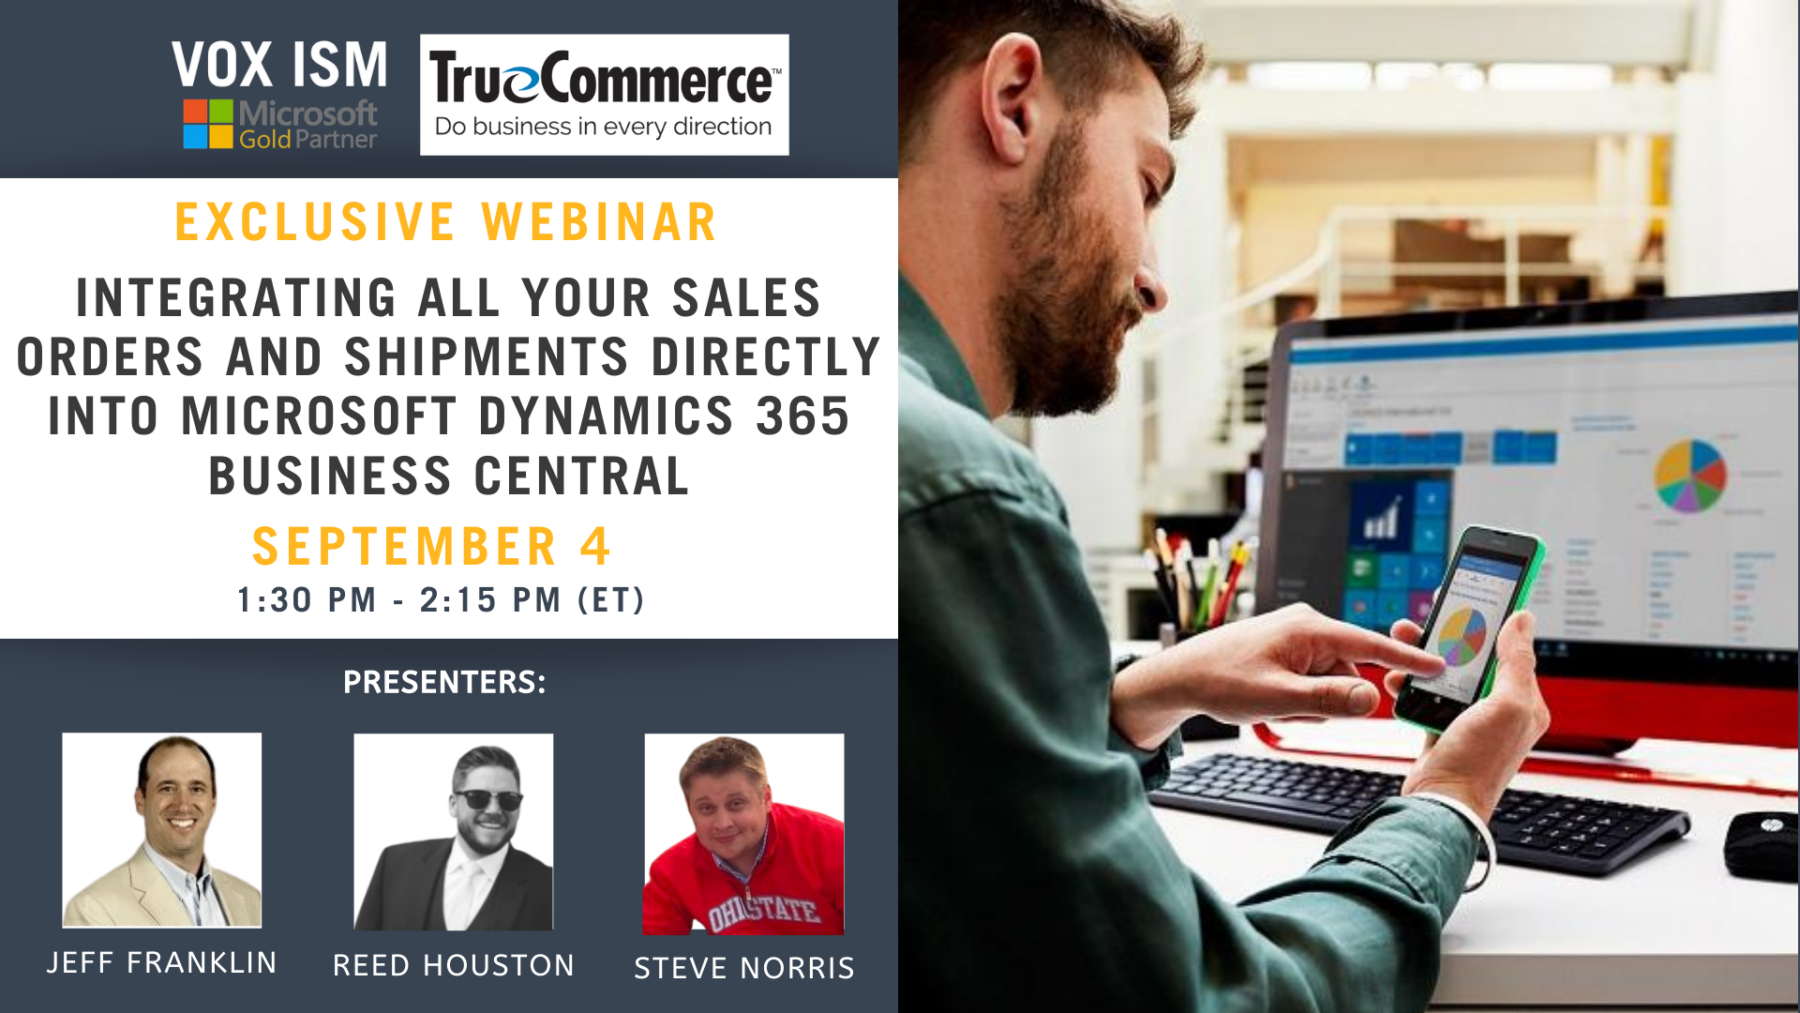 Integrating all your sales orders and shipments directly into Microsoft Dynamics 365 Business Central - September 4 - Webinar